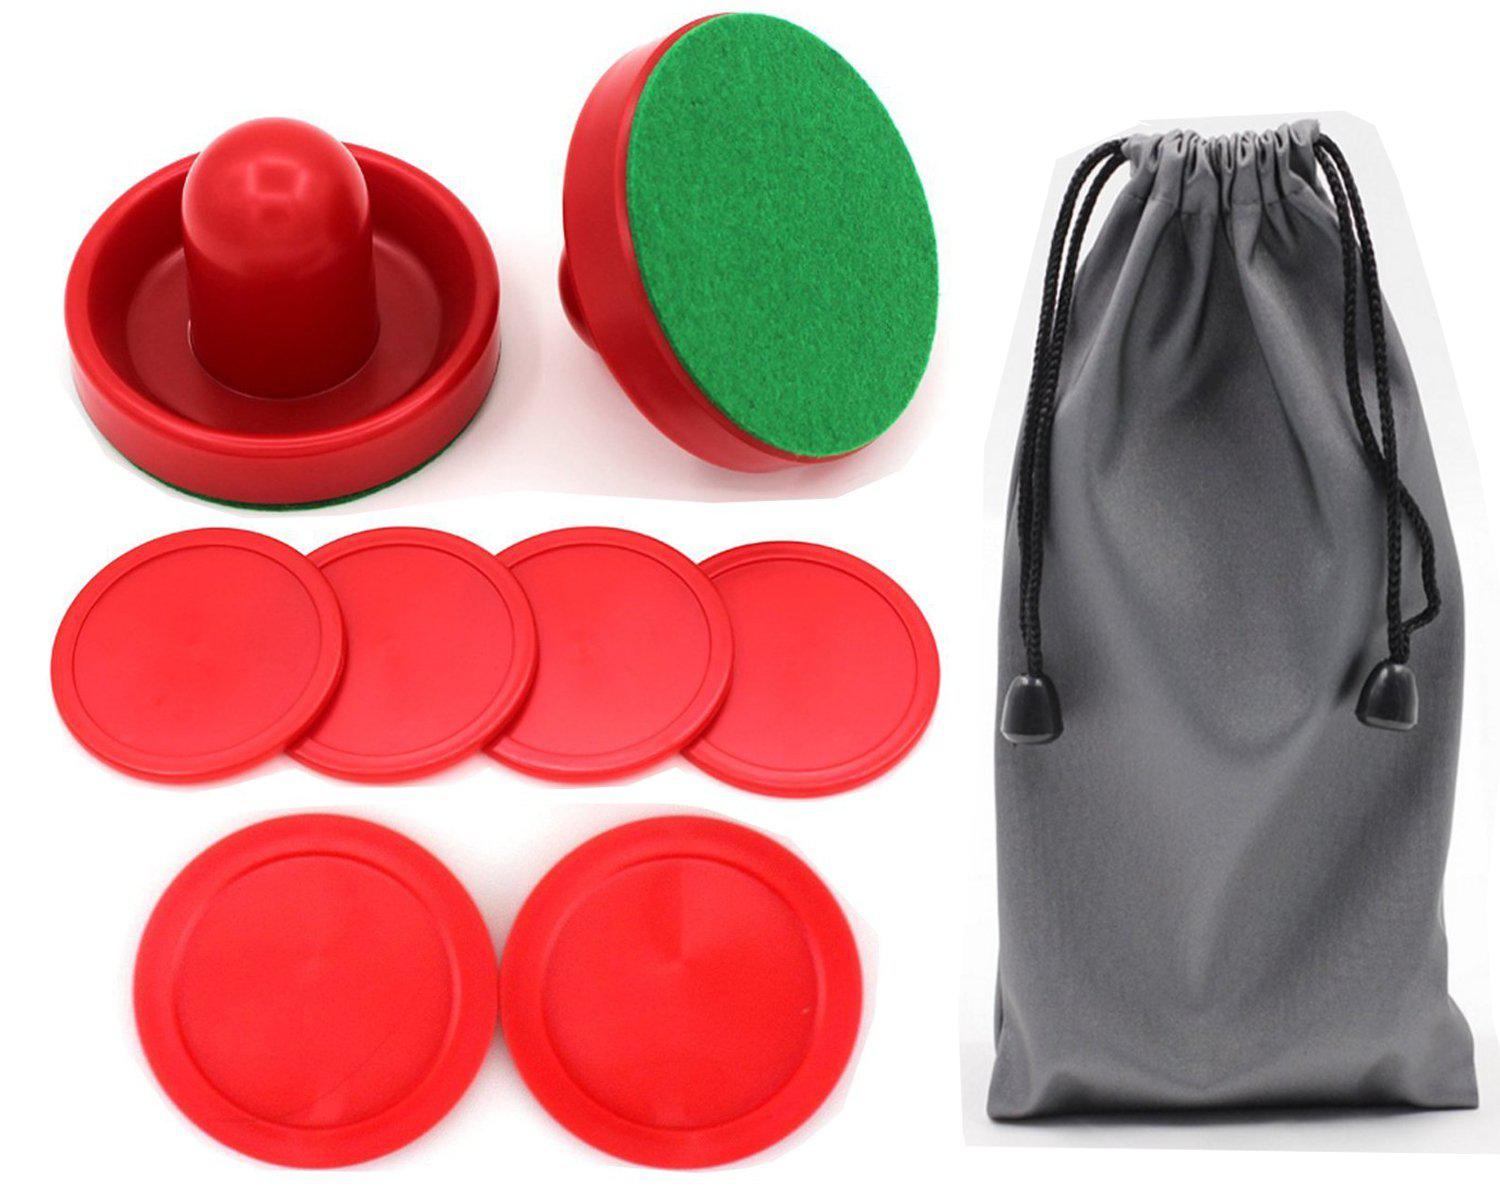 qtimal home standard air hockey paddles and 2 size pucks, small size for kids, large size for adult, great goal handles pushe